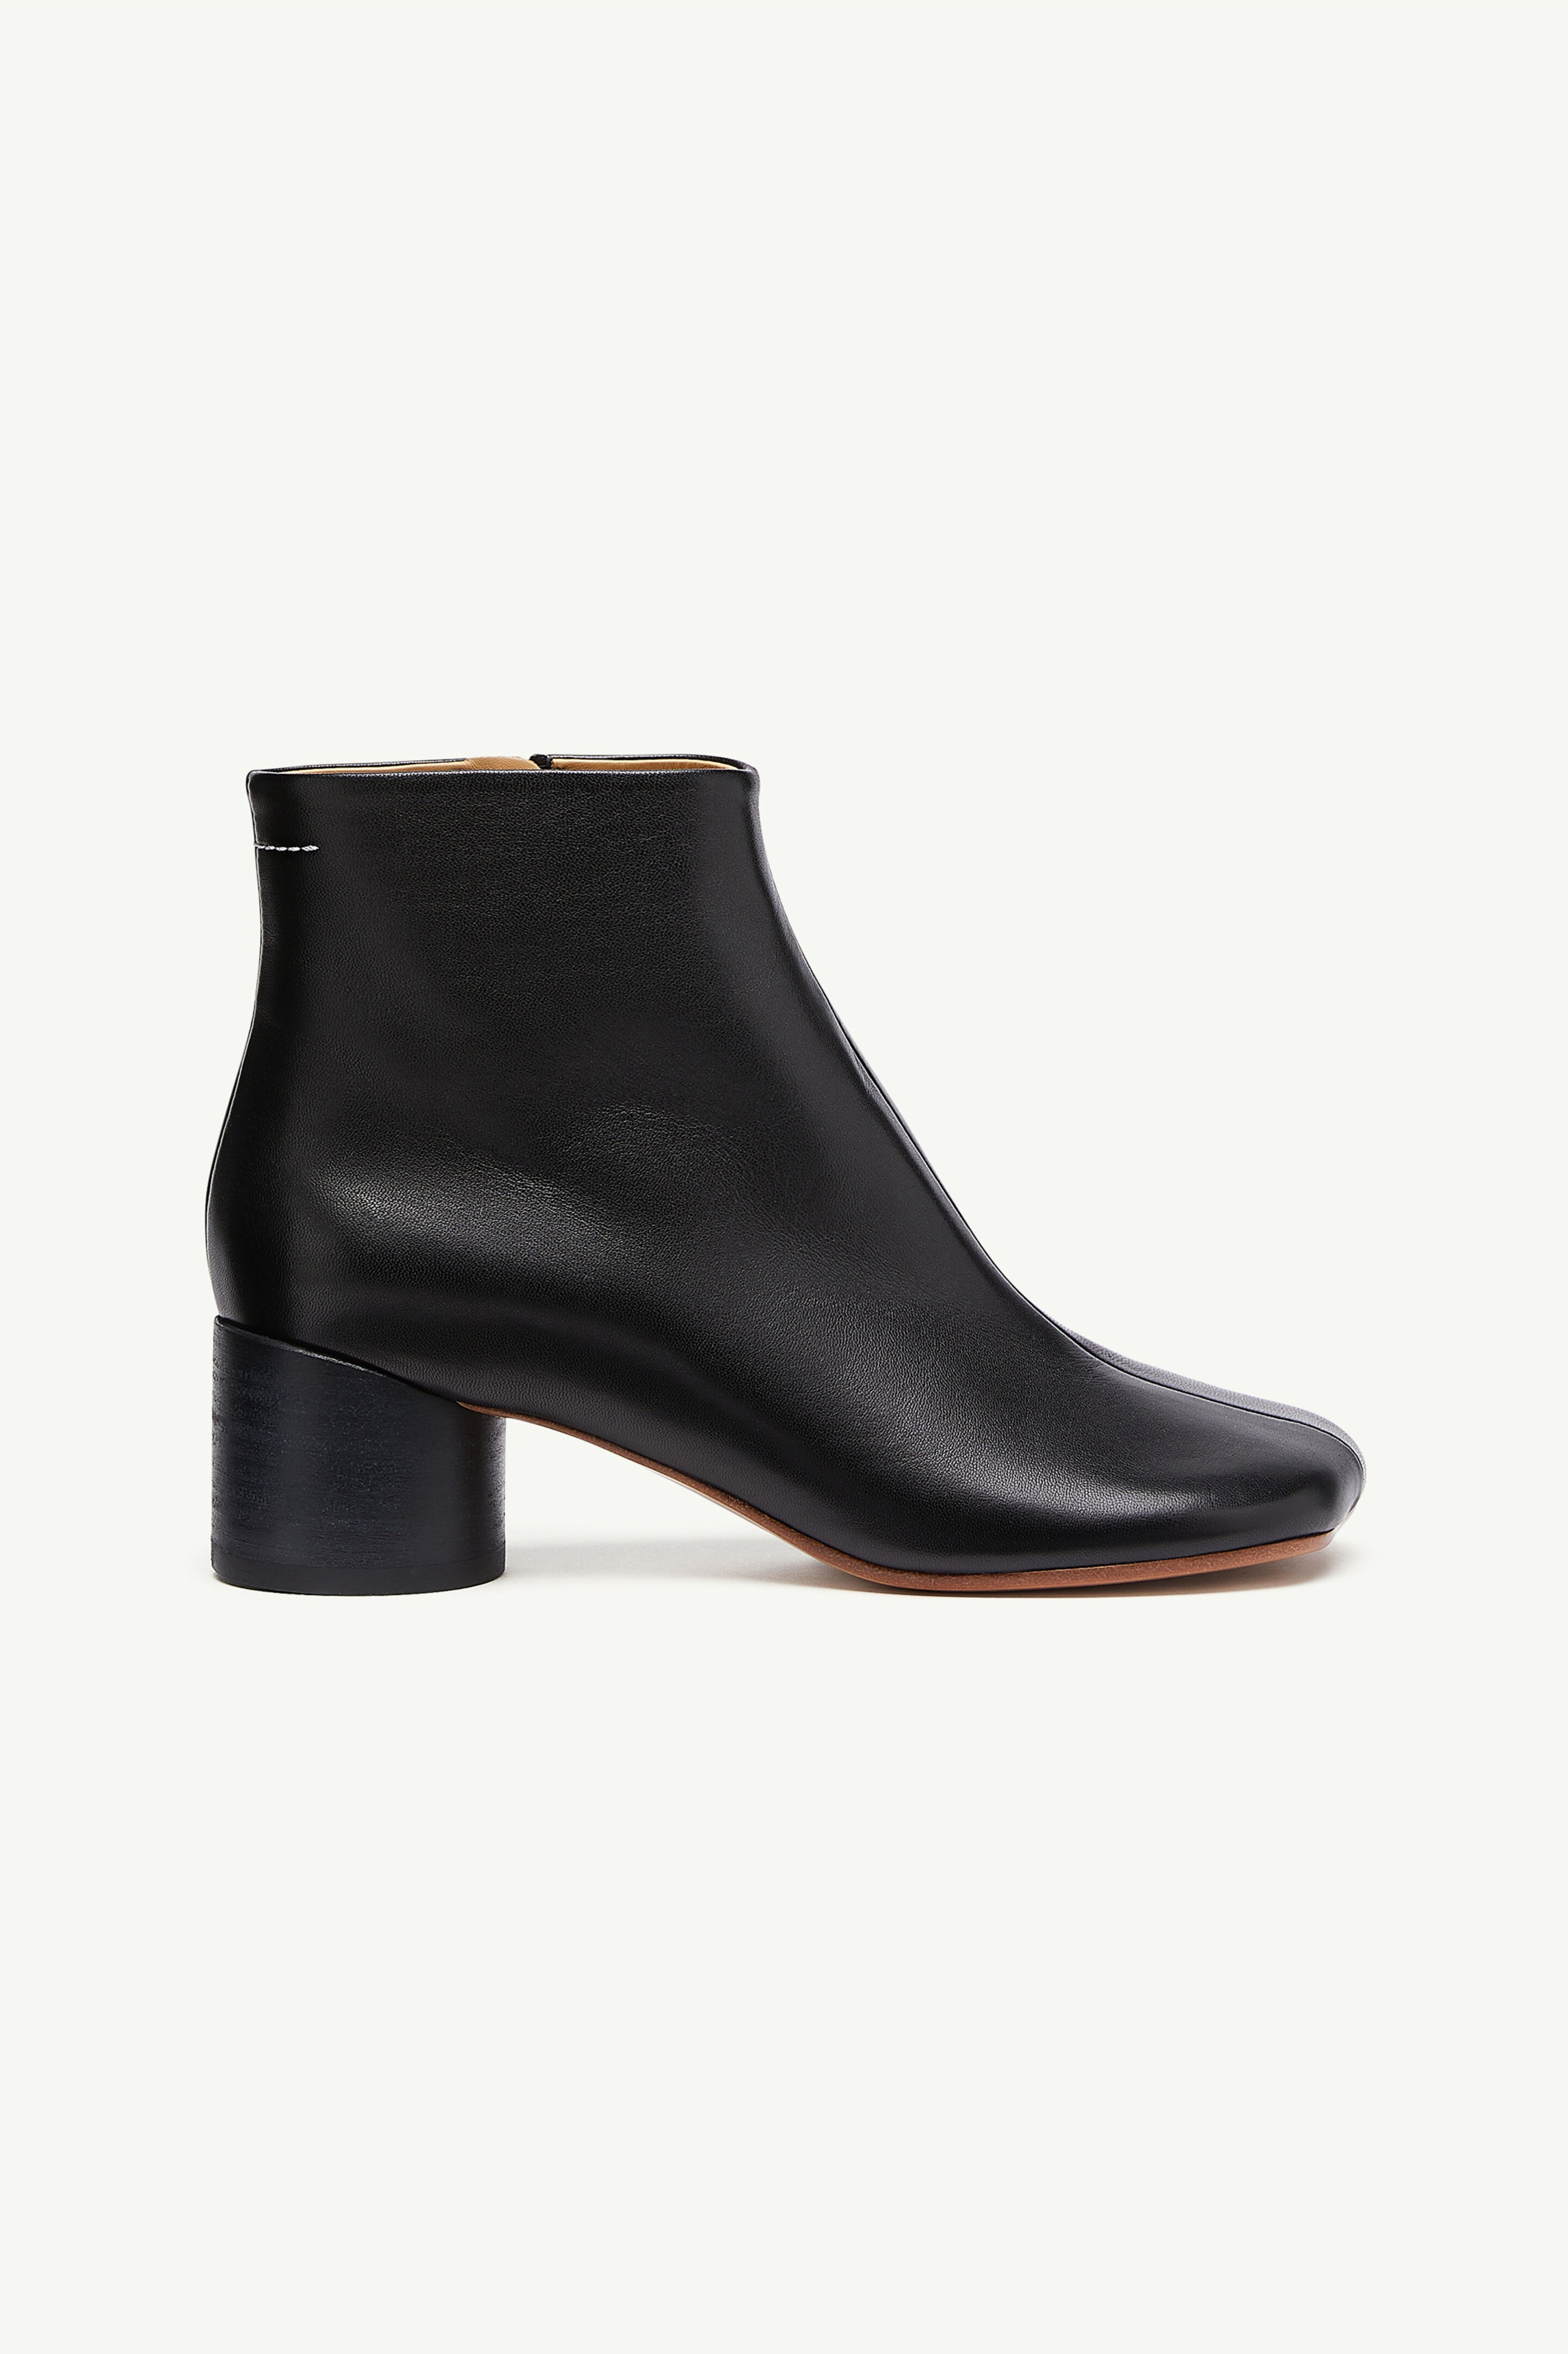 Anatomic classic ankle boots - 1